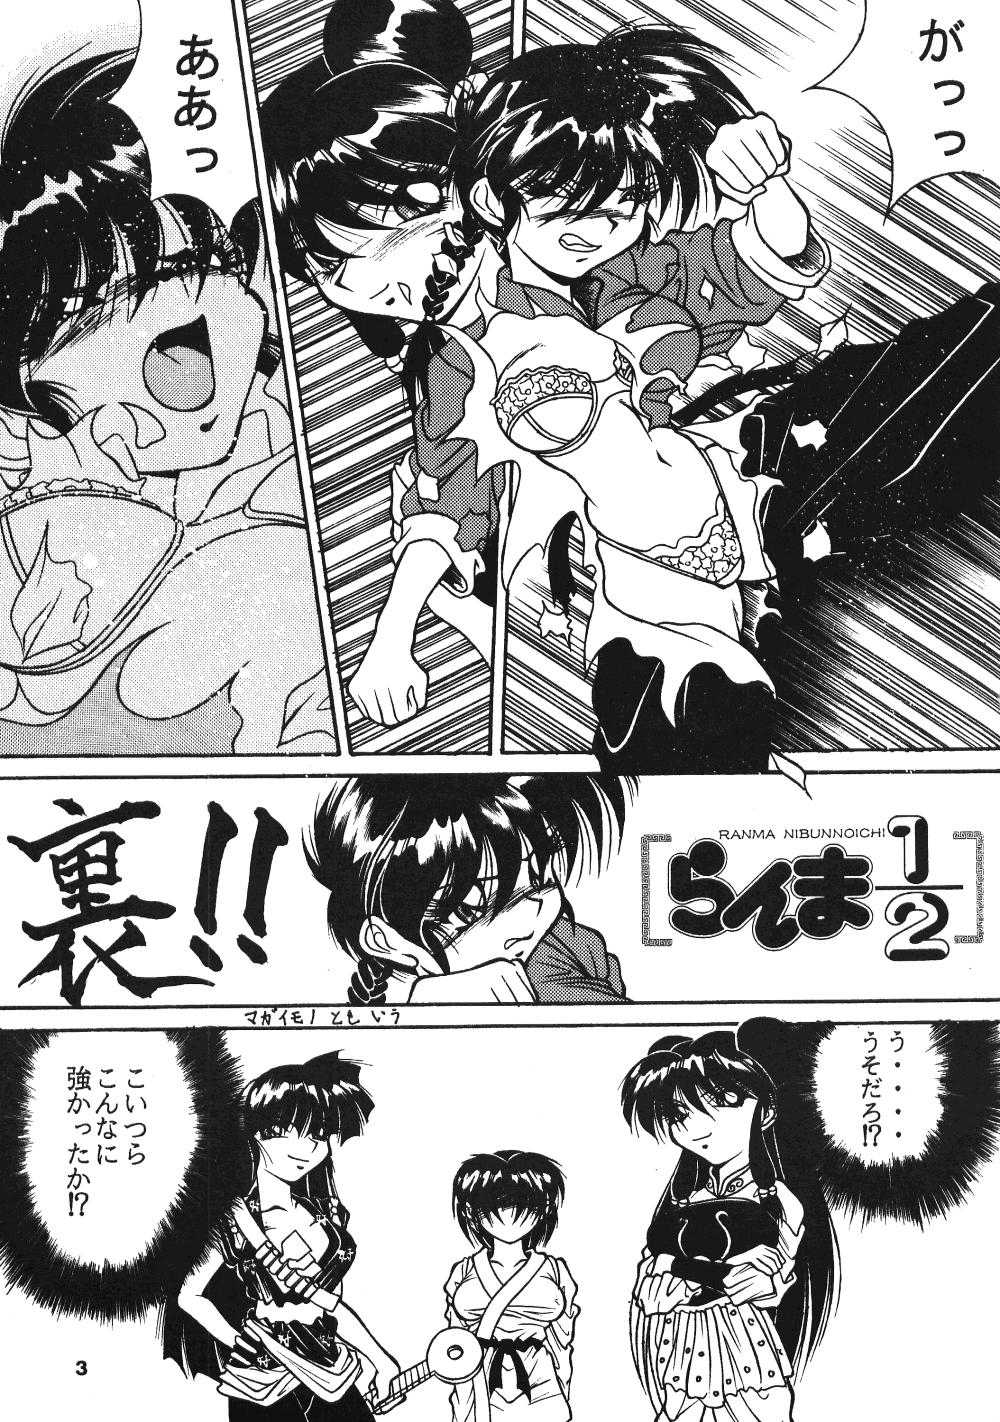 Sucking Dick Seinen Sunday - Street fighter Ranma 12 Ghost sweeper mikami Abuse - Page 2